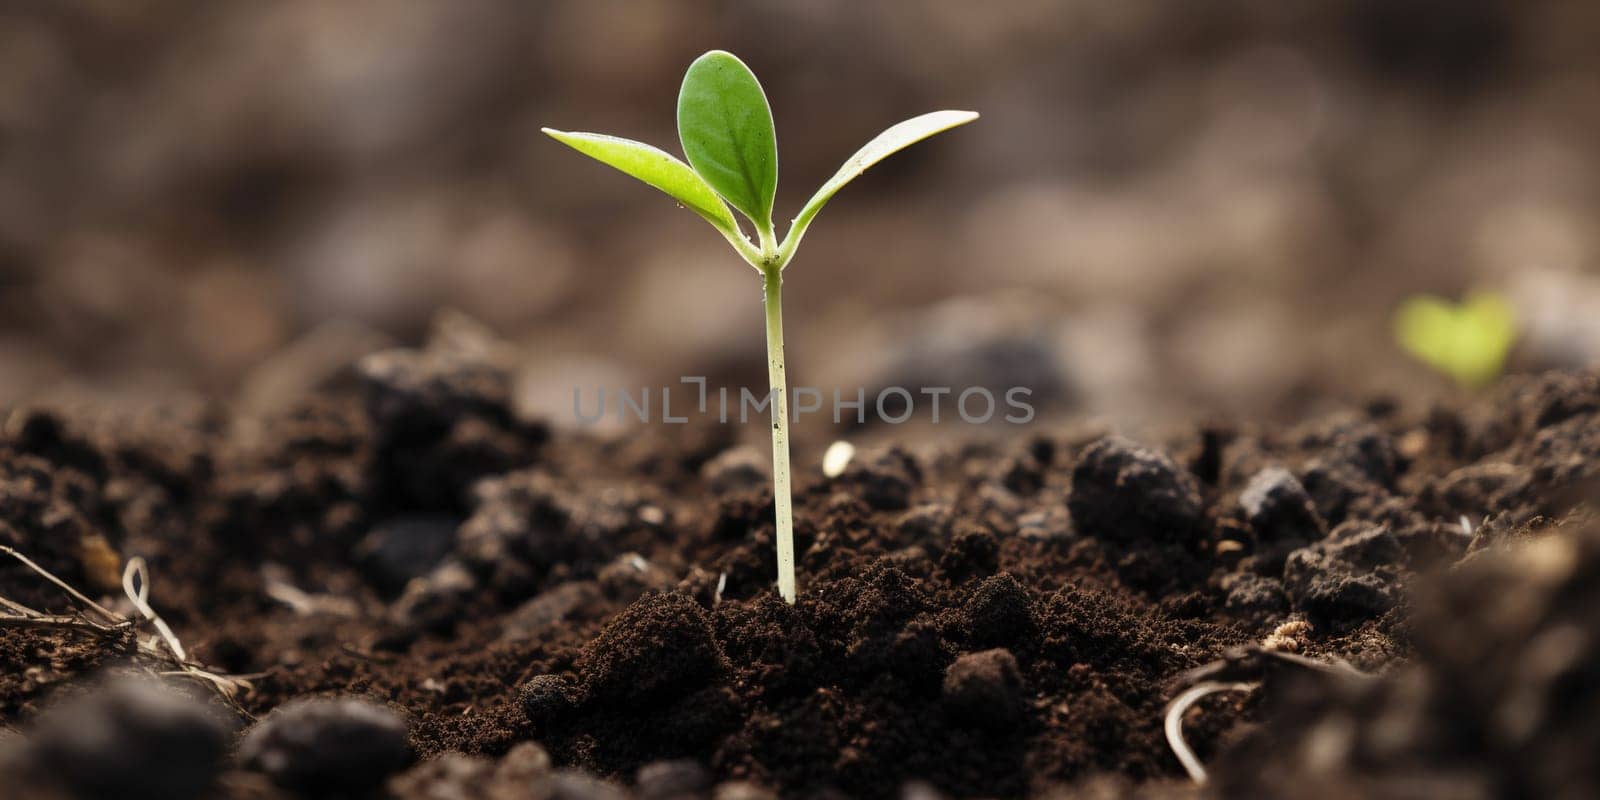 Small Groon Sprout Growing From The Soil by tan4ikk1